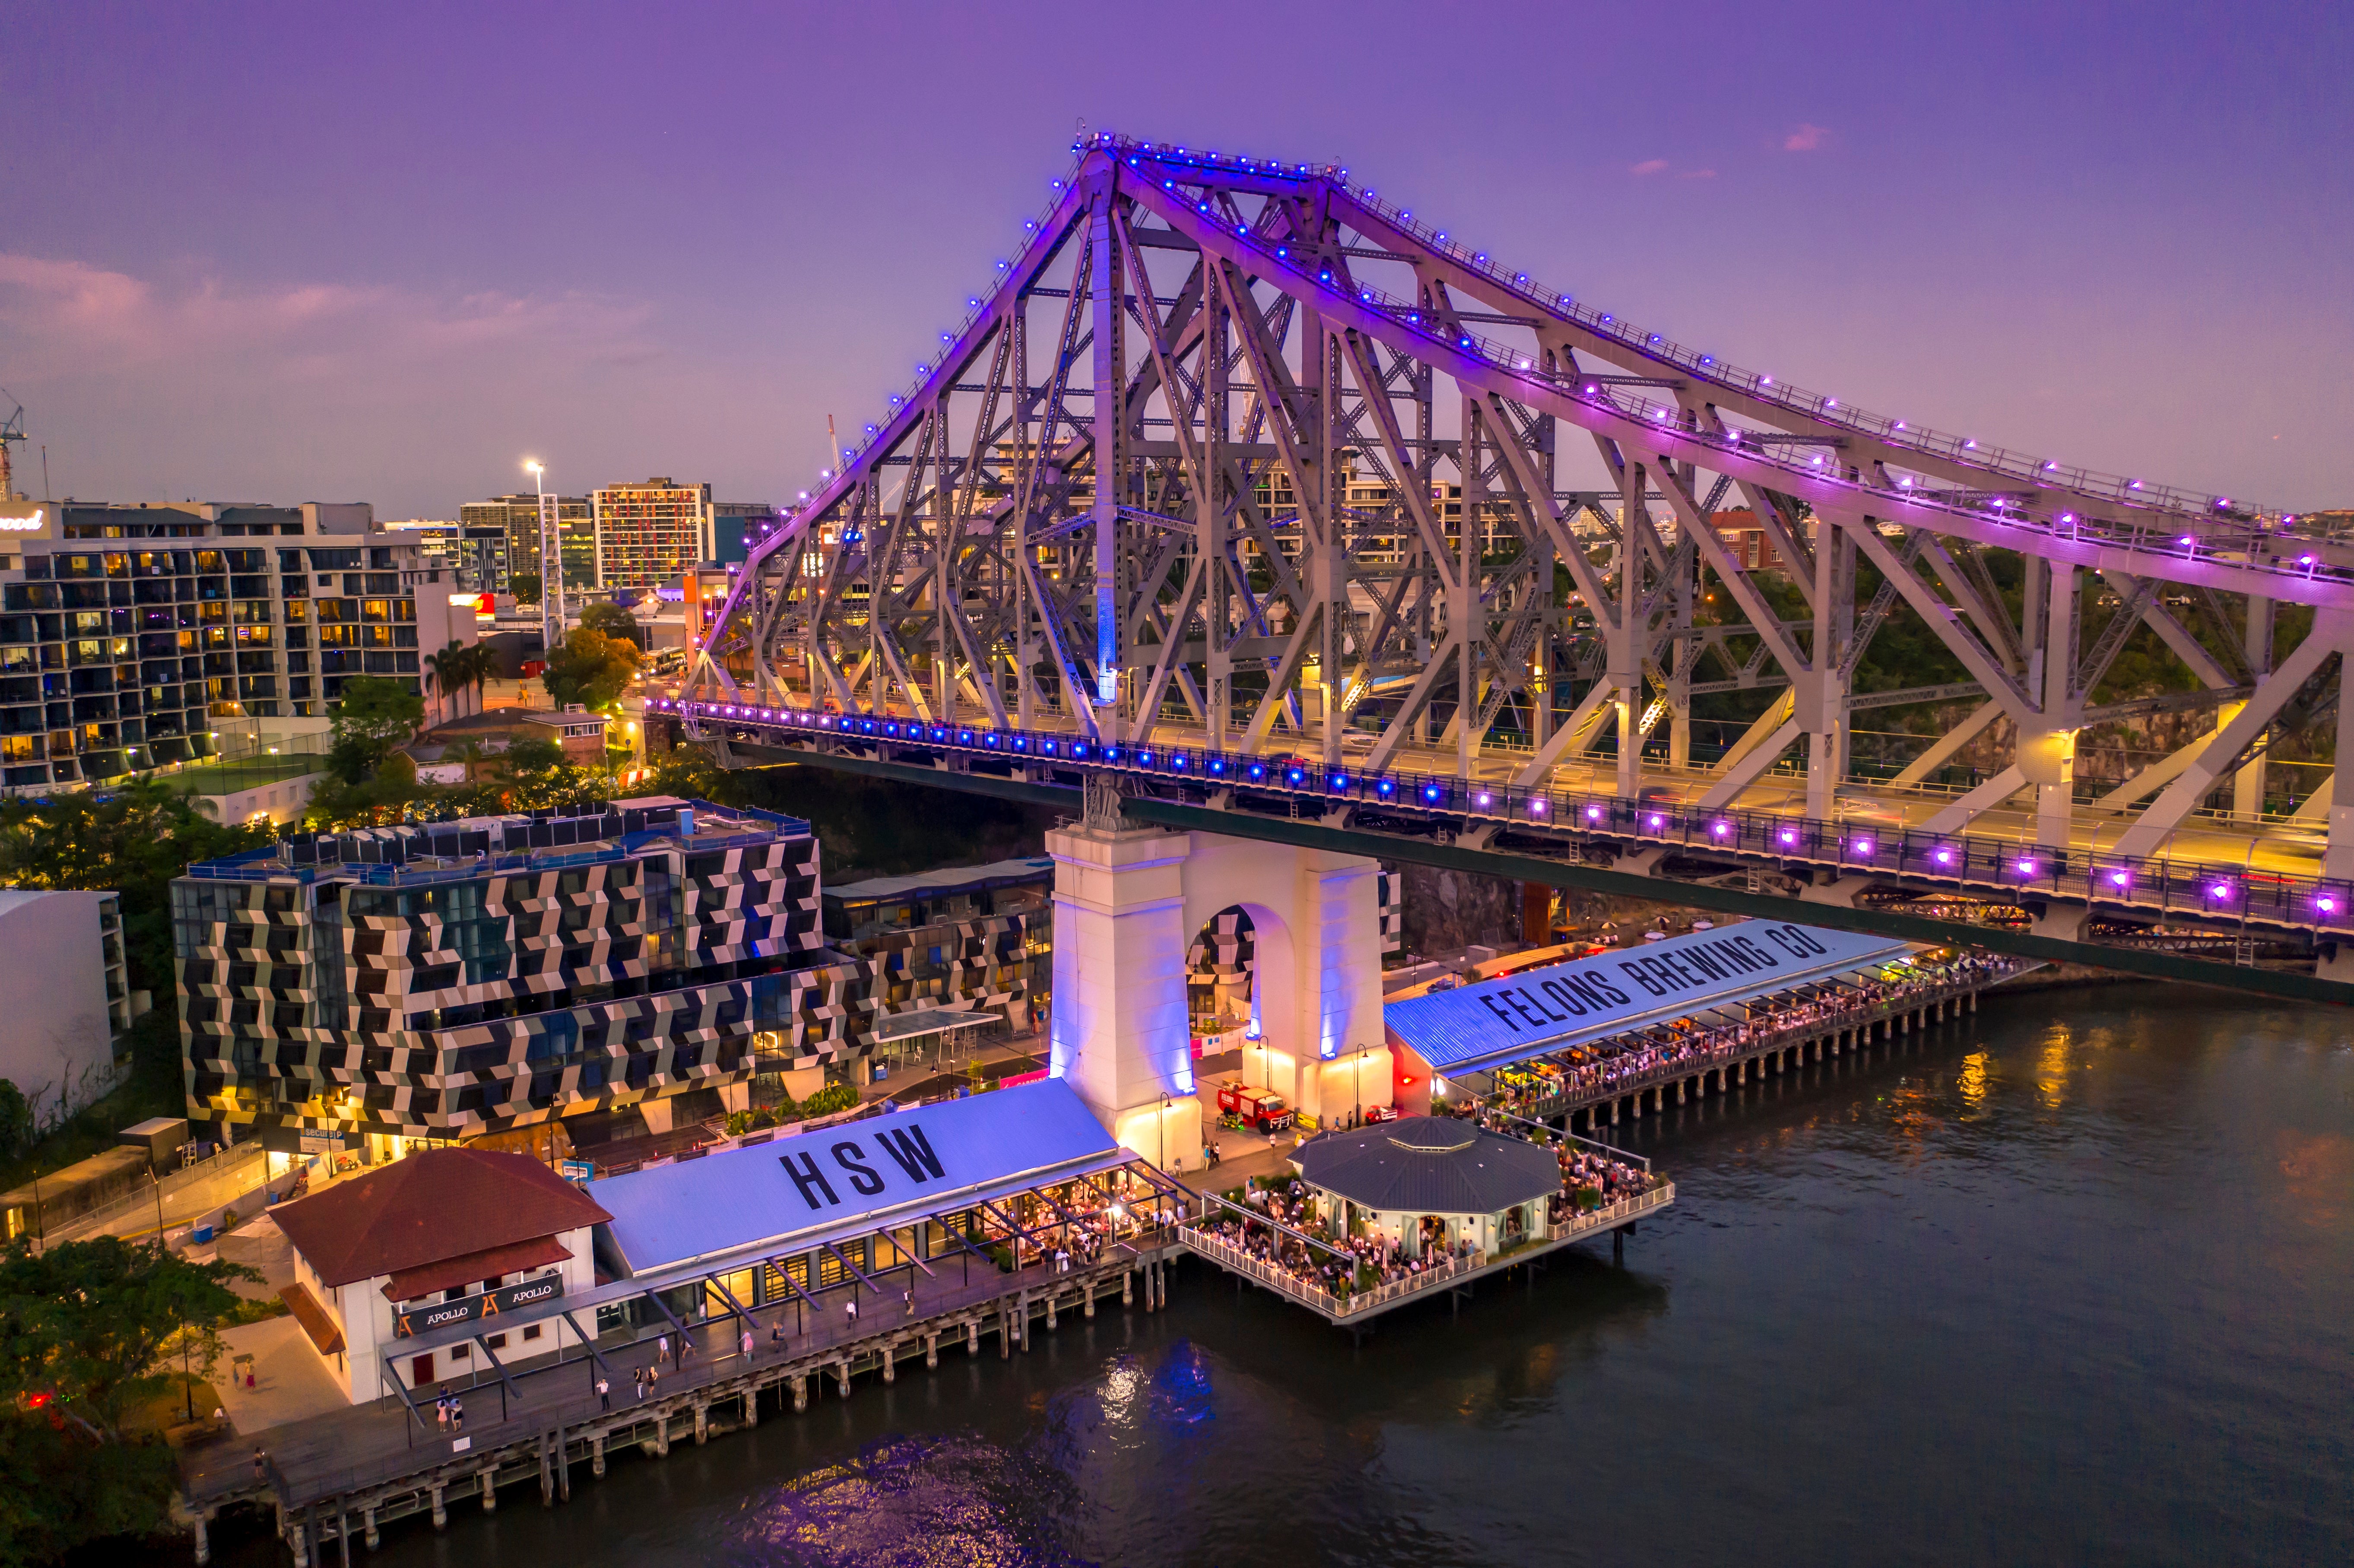 Howard Smith Wharves, located on a once-neglected piece of land, has been transformed into a bustling pedestrian boardwalk lined with restaurants, bars, hotels, and event spaces